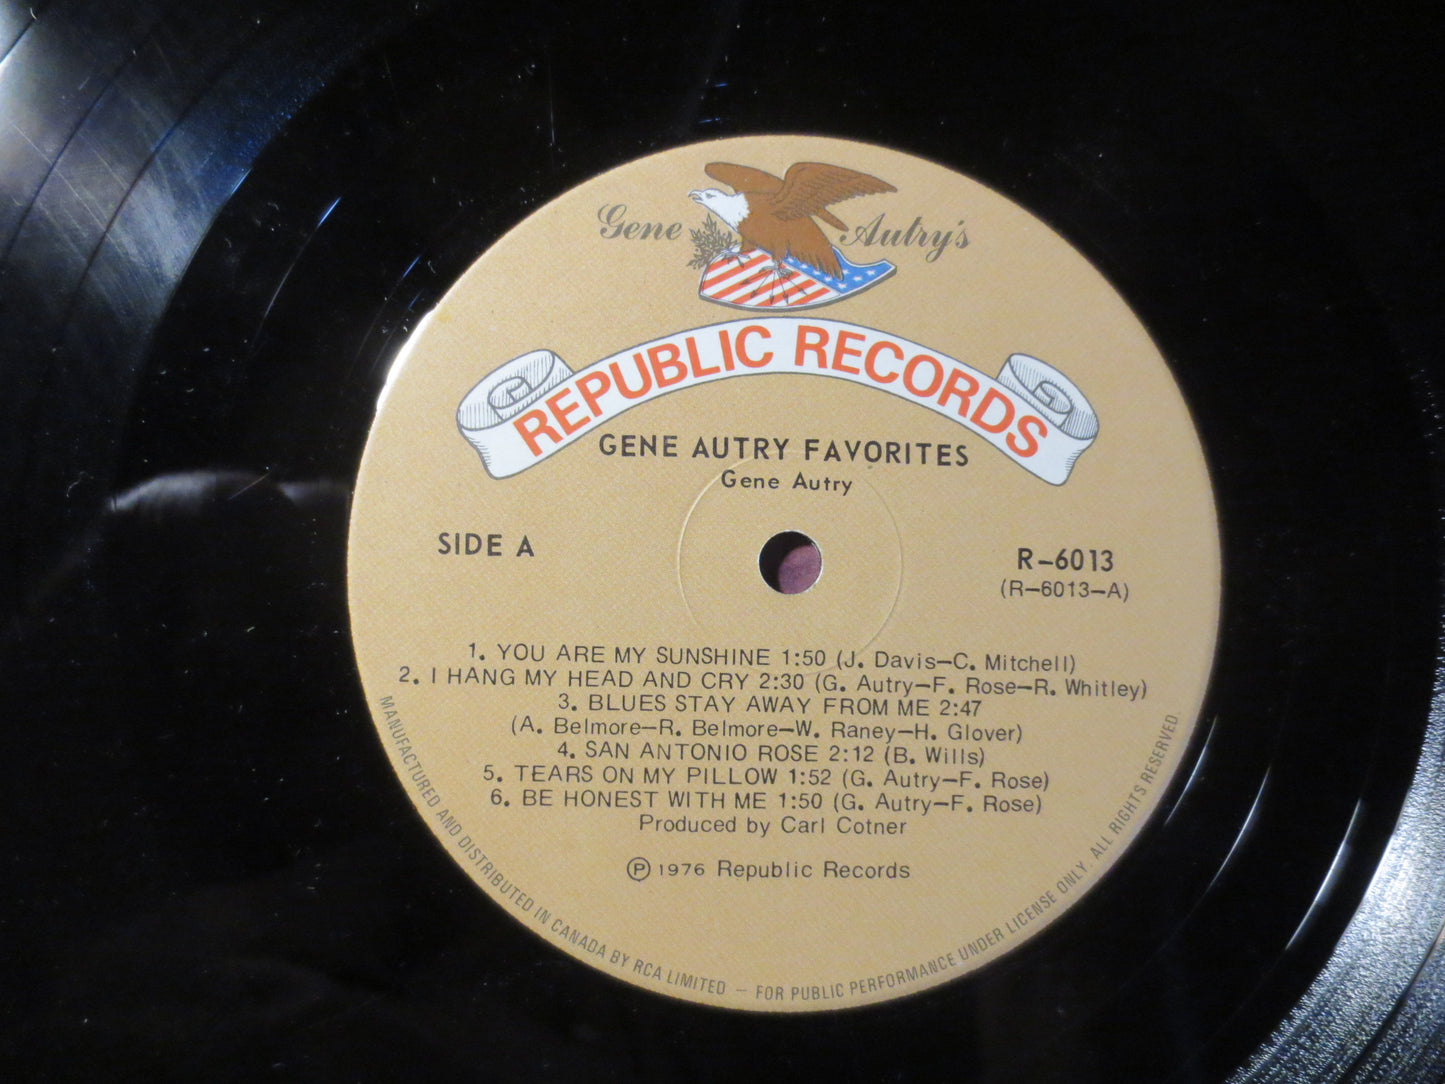 GENE AUTRY, FAVORITES, Country Records, Gene Autry Record, Gene Autry Album Gene Autry Lp, Country Album, Lps, 1976 Records